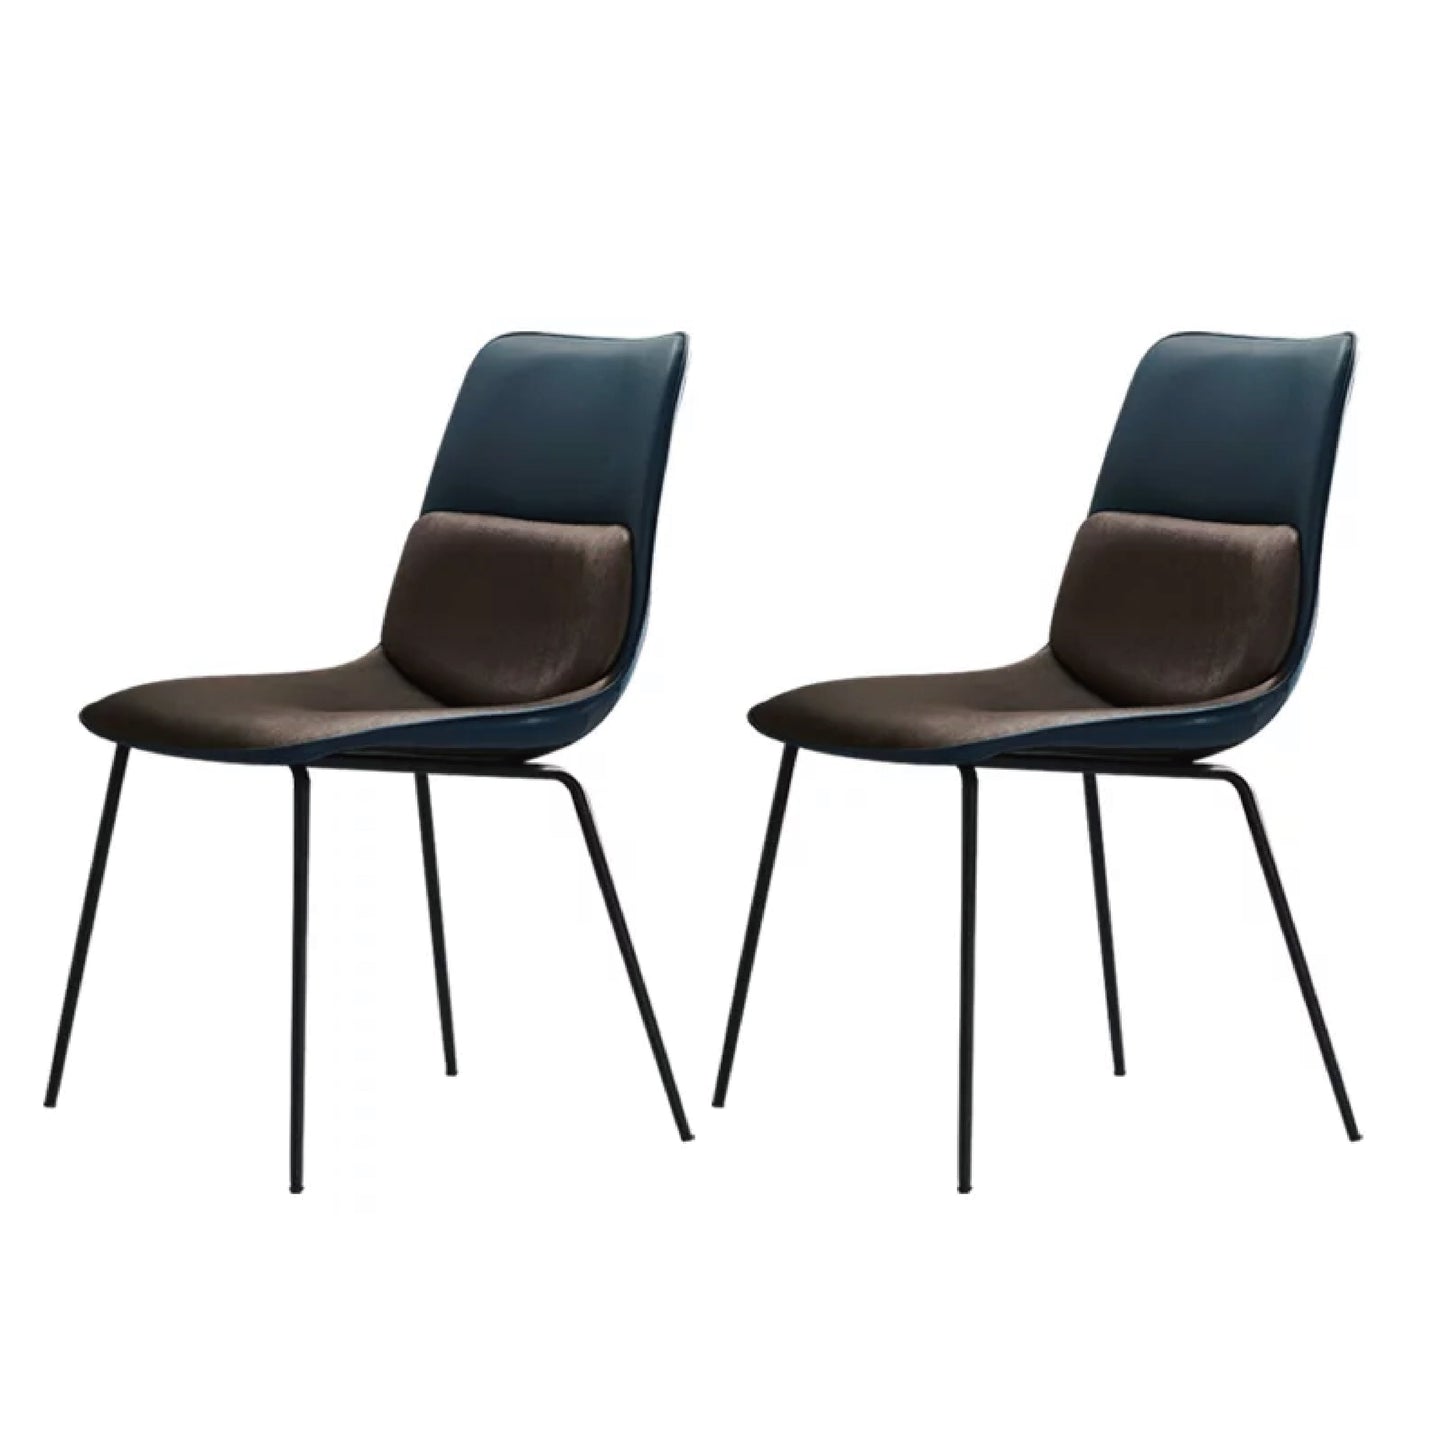 Camino Steel Art Dining Chairs (Set of 2) – In Stock